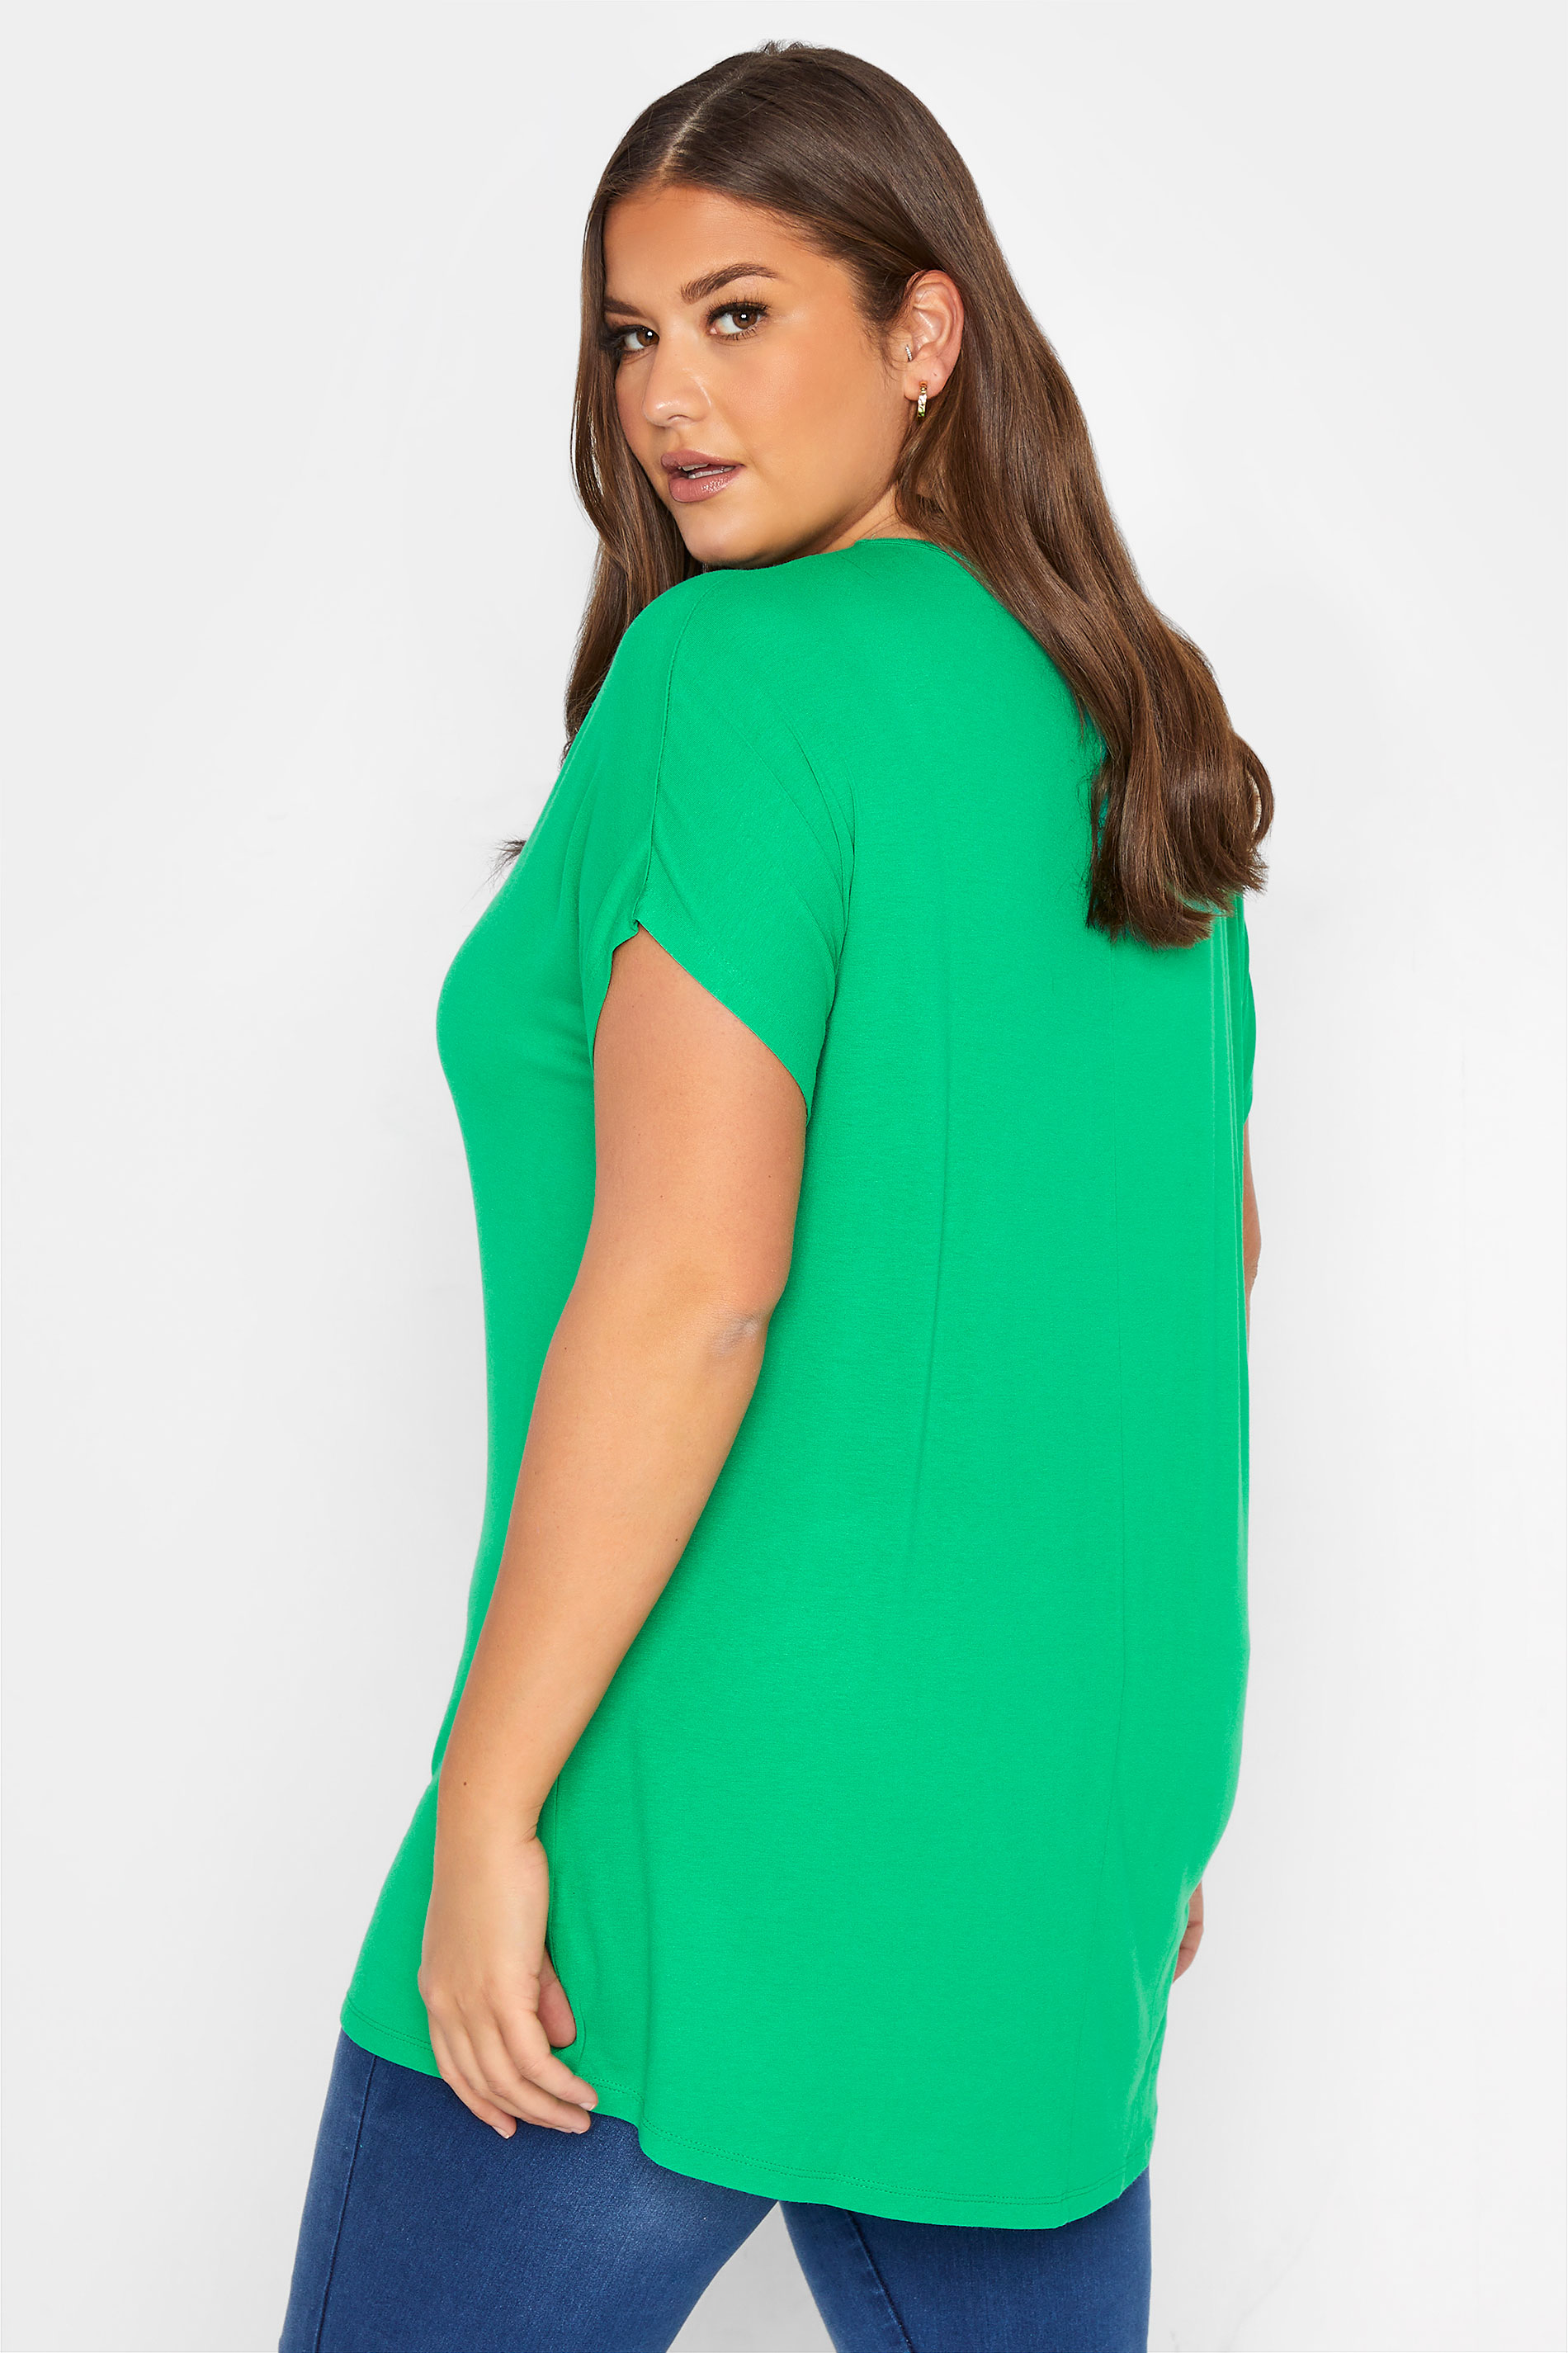 Grande taille  Tops Grande taille  T-Shirts | T-Shirt Vert Flashy Manches Courtes Jersey - GU04915